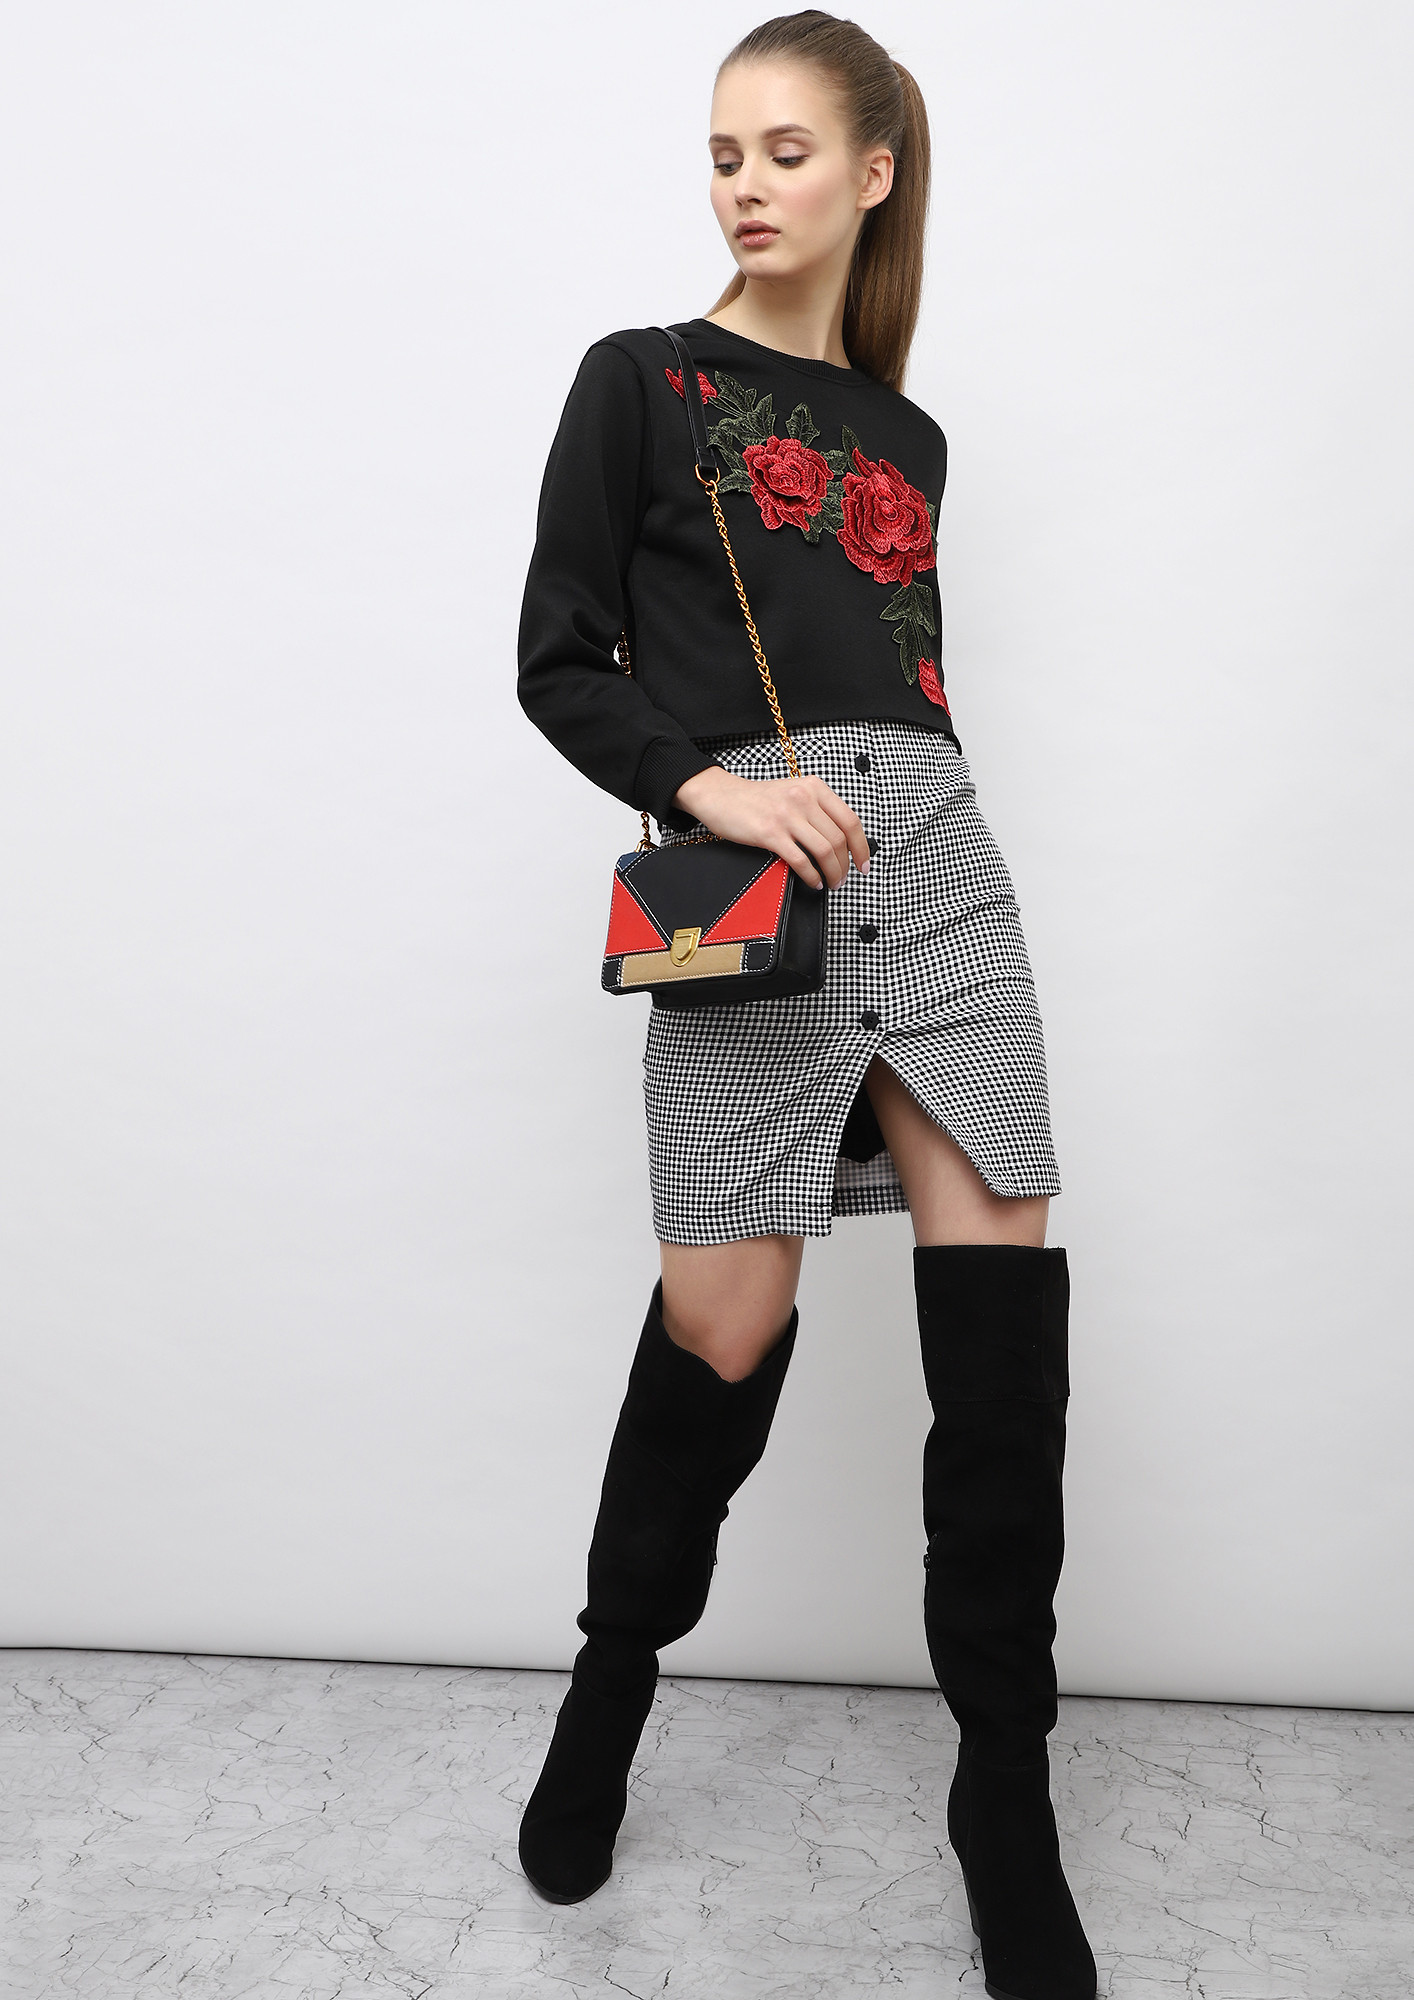 ITS ALL ABOUT THE ROSES BLACK SWEATSHIRT